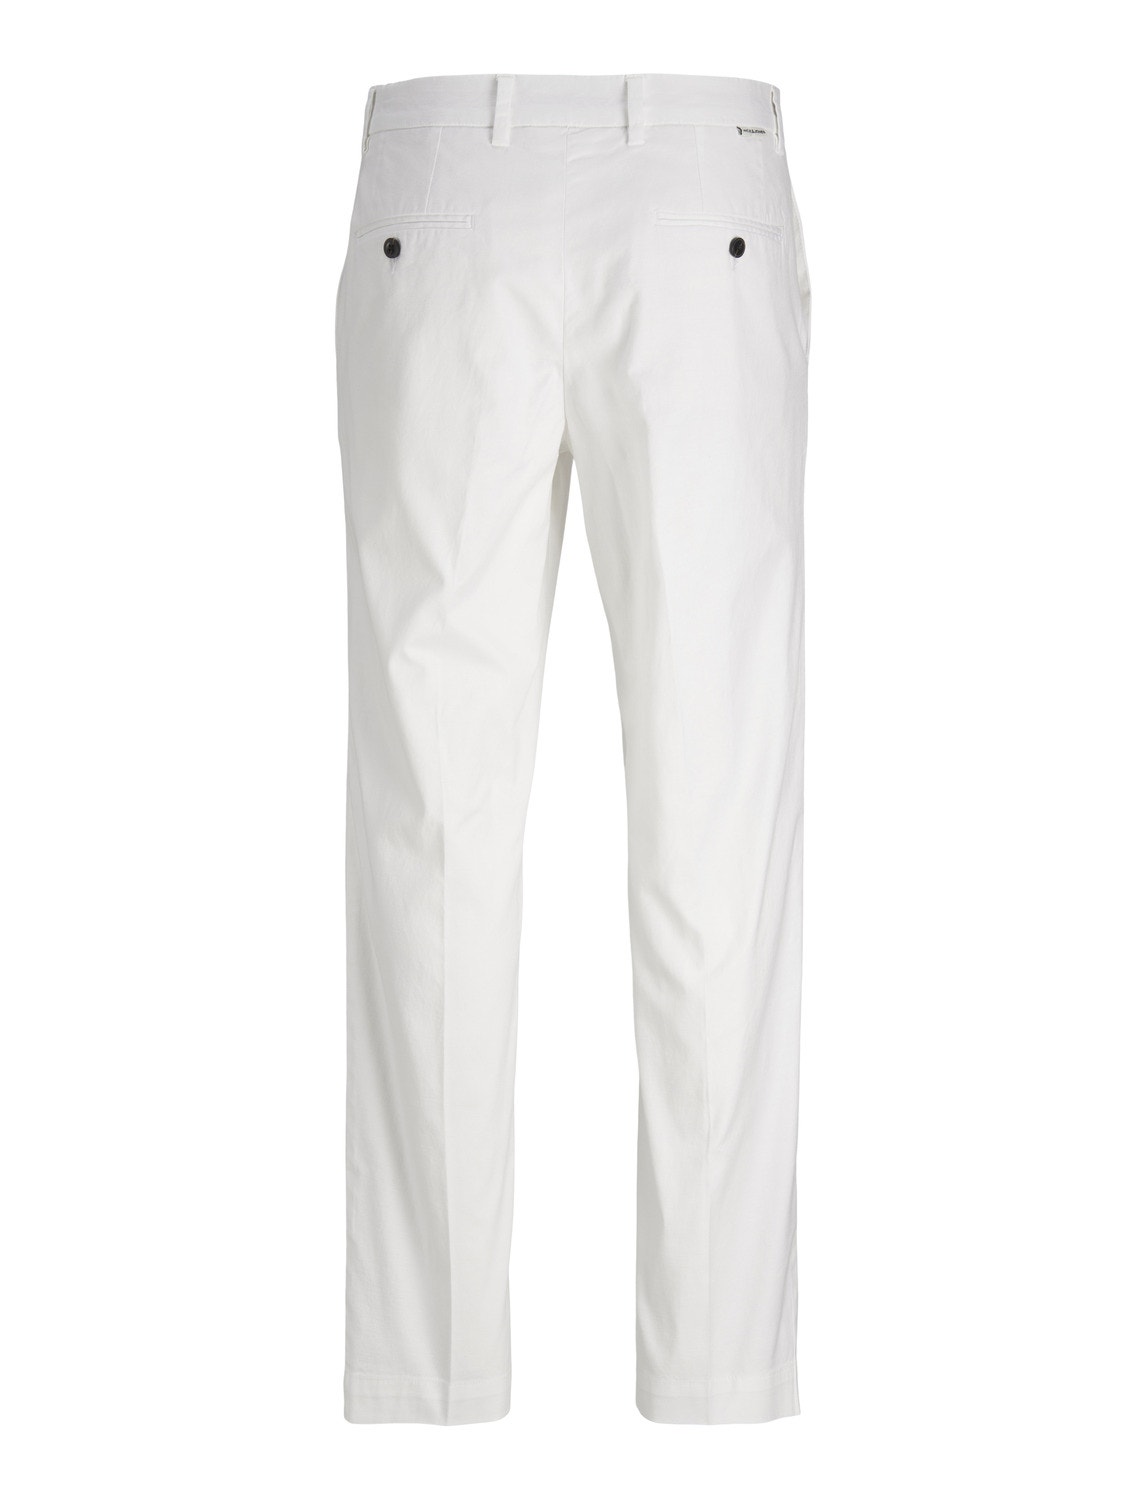 Jack & Jones Relaxed Fit Chino trousers -Bright White - 12255441